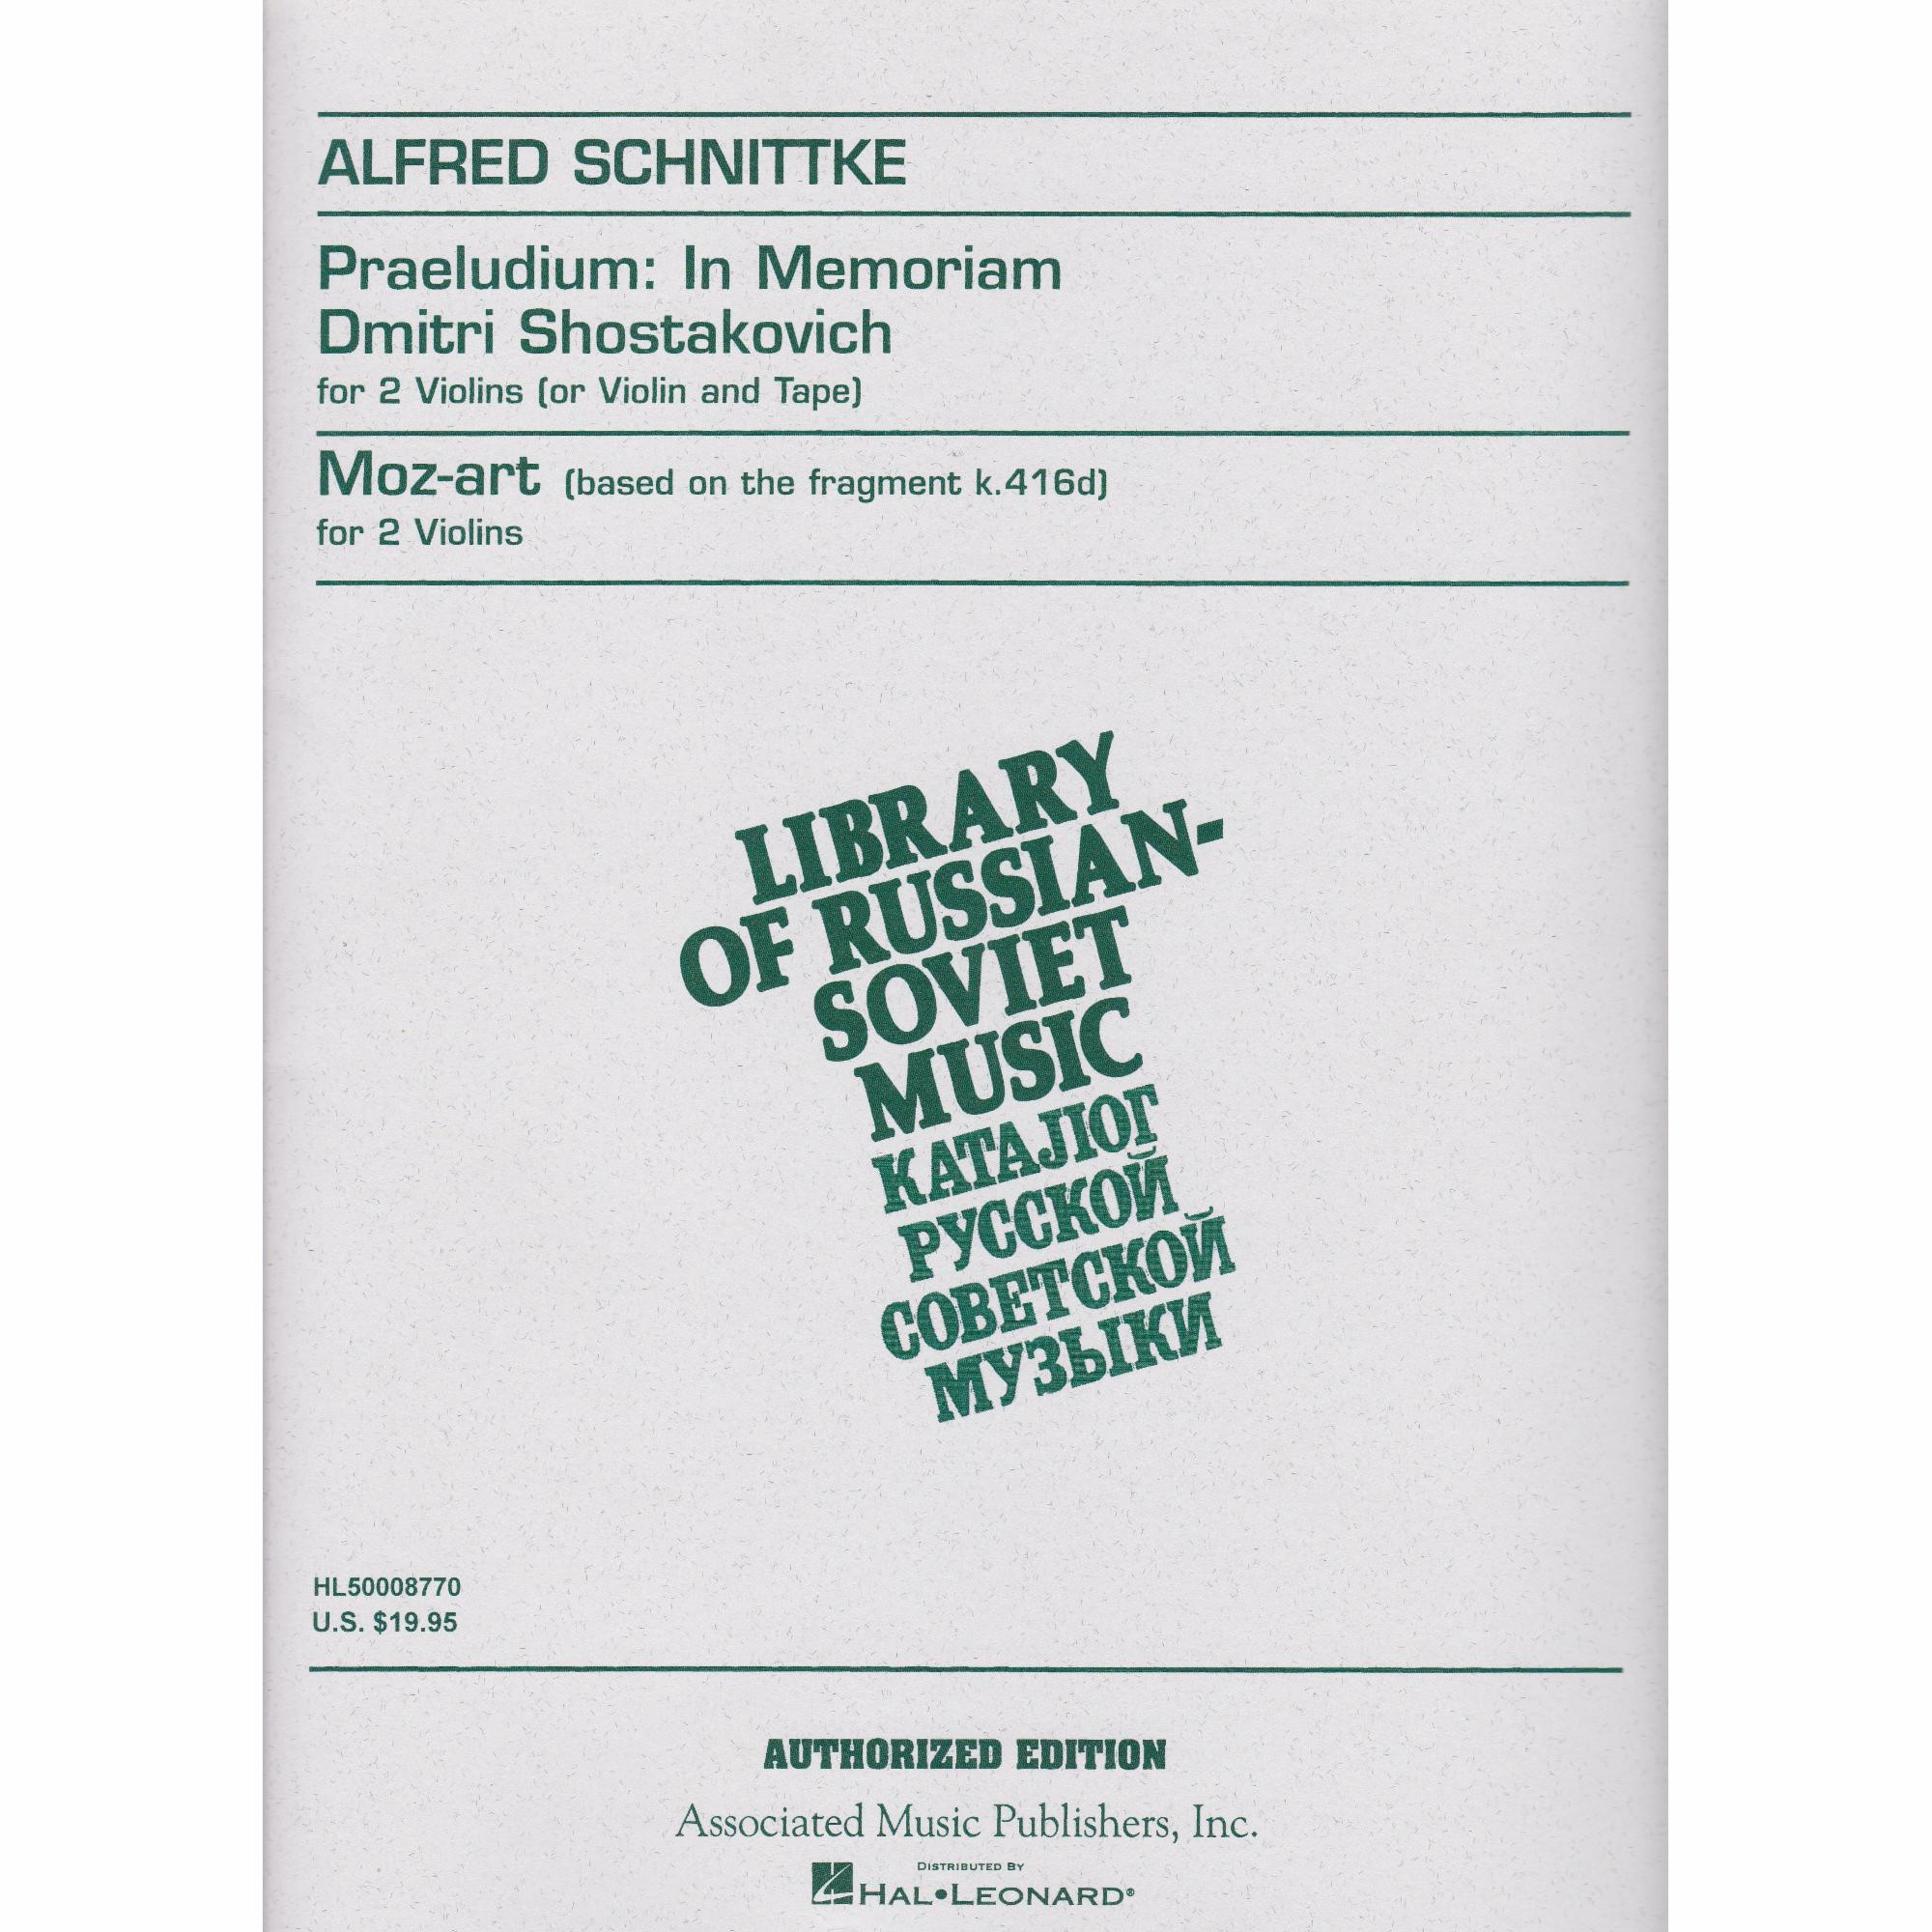 Two Pieces by Alfred Schnittke for Two Violins